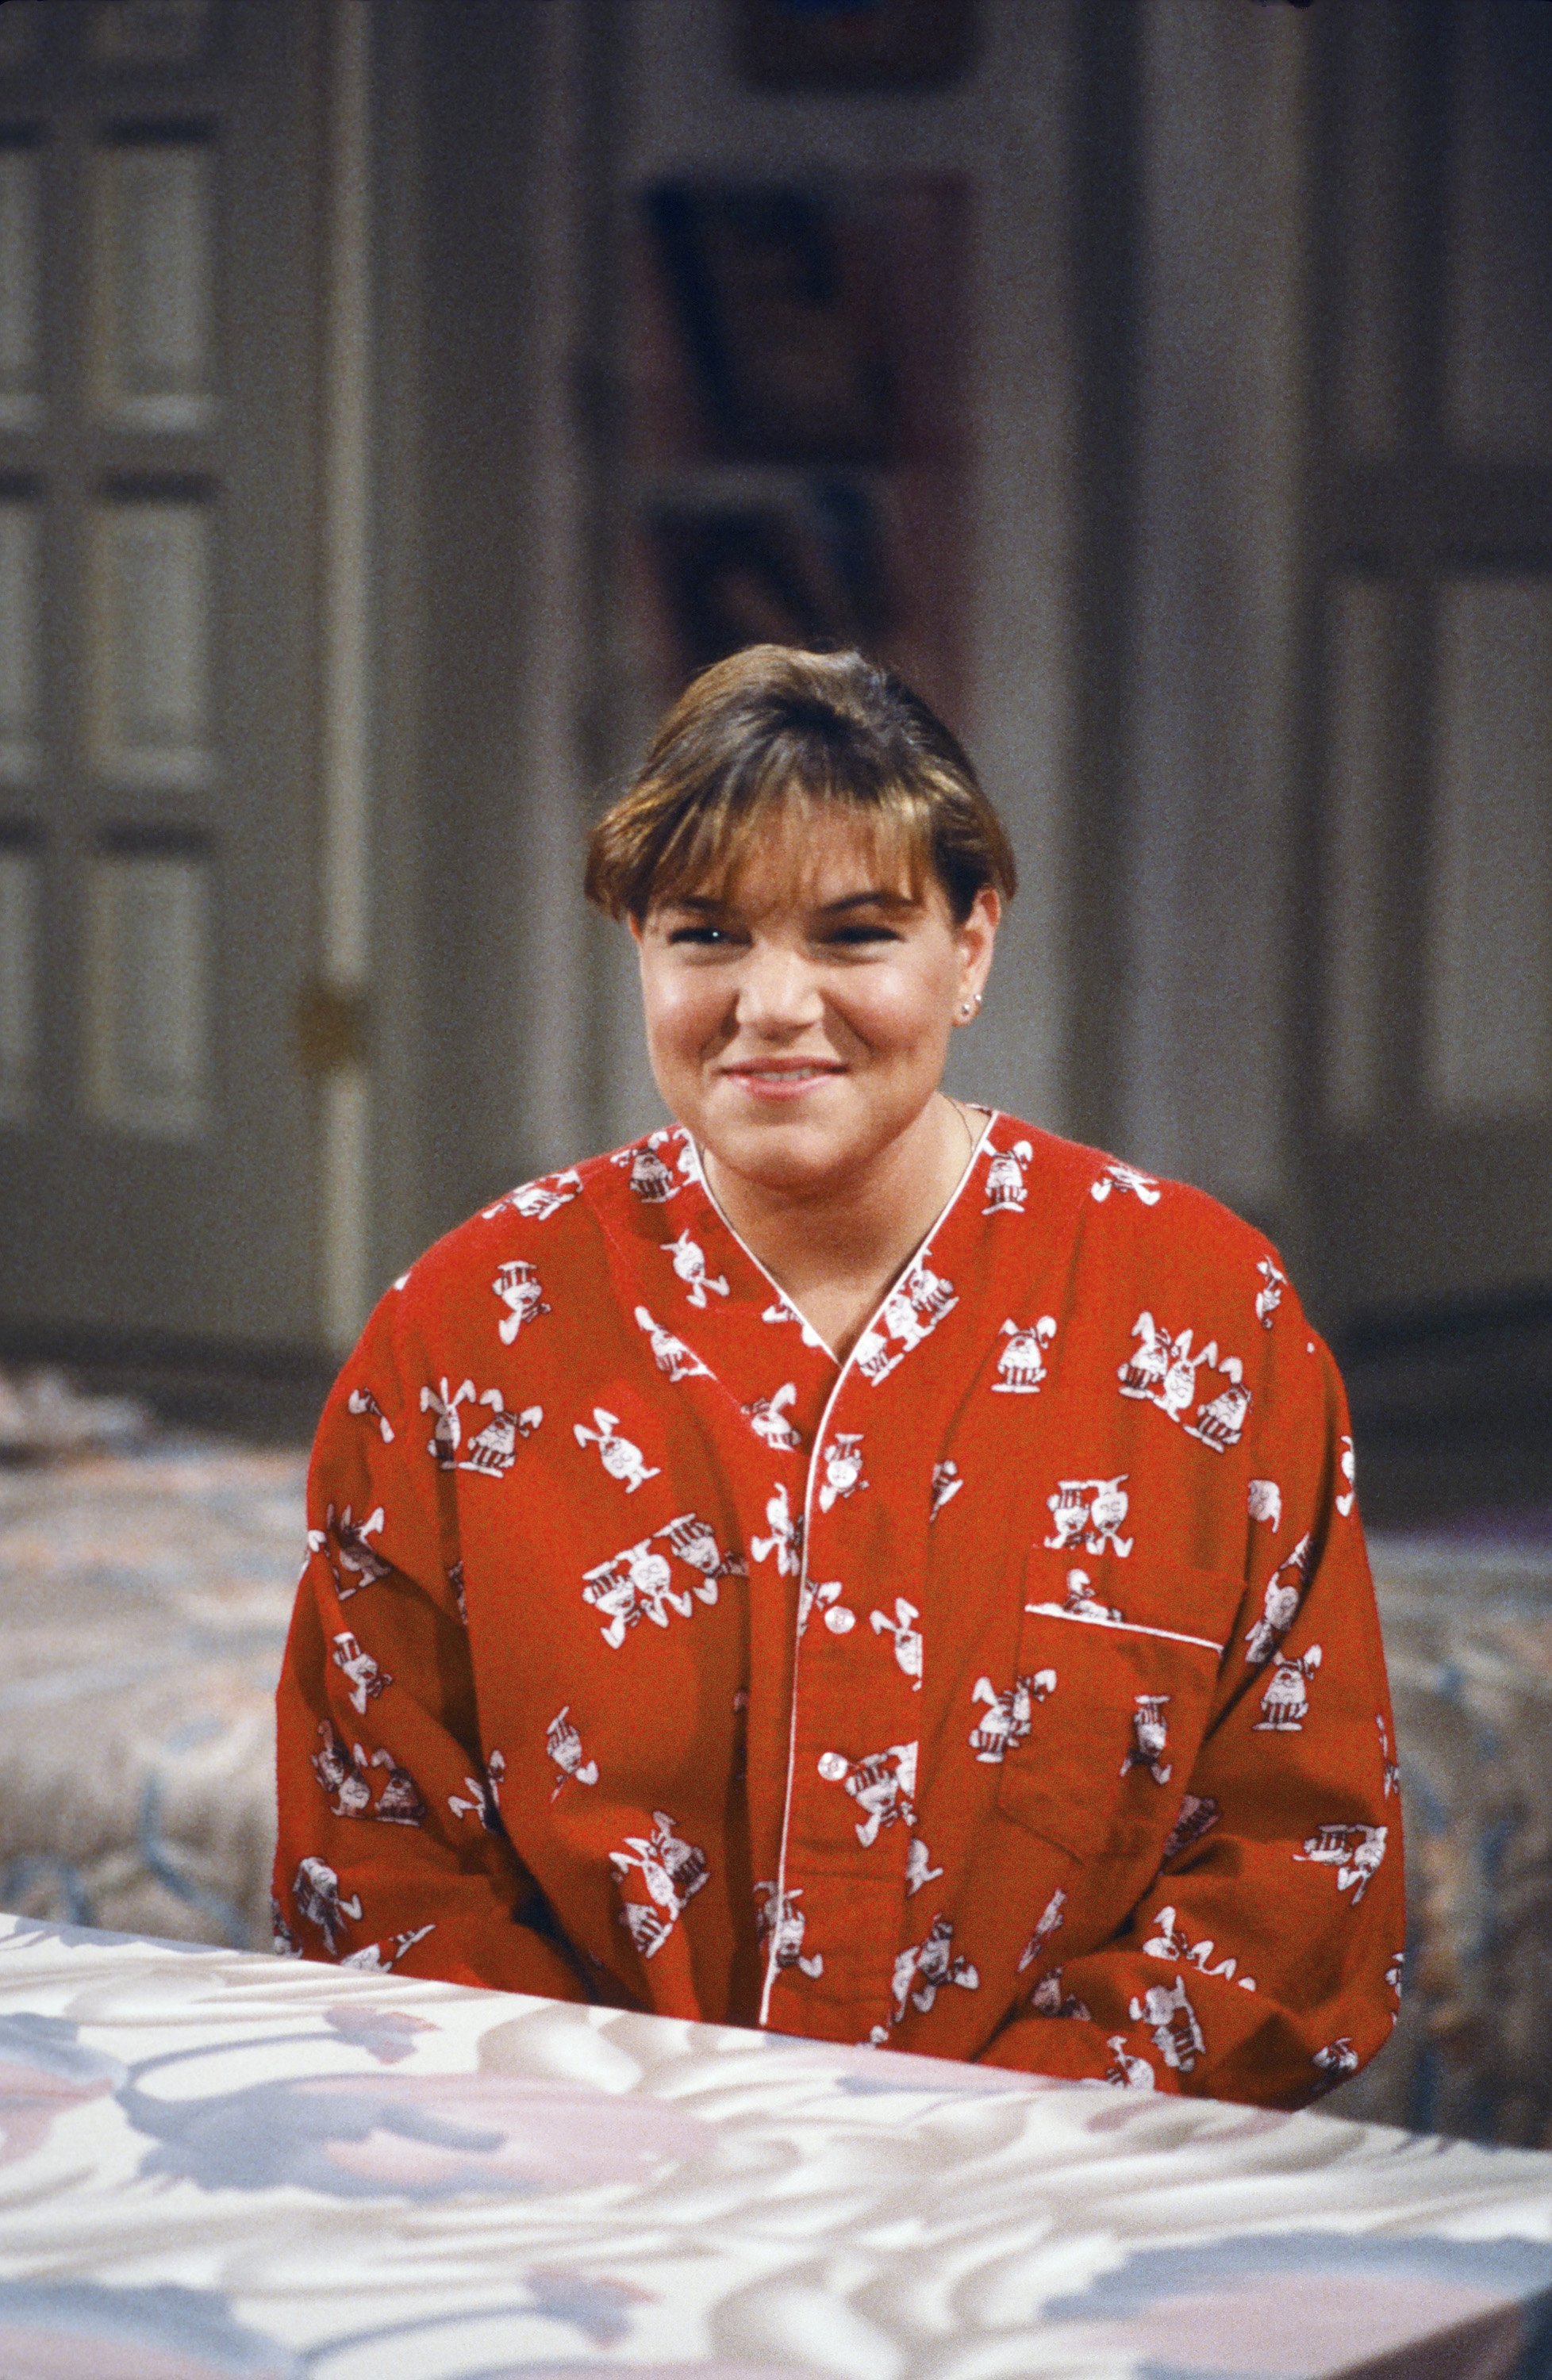 Mindy Cohn as Natalie Green on "The Facts of Life" in an undated photo | Source: Getty Images